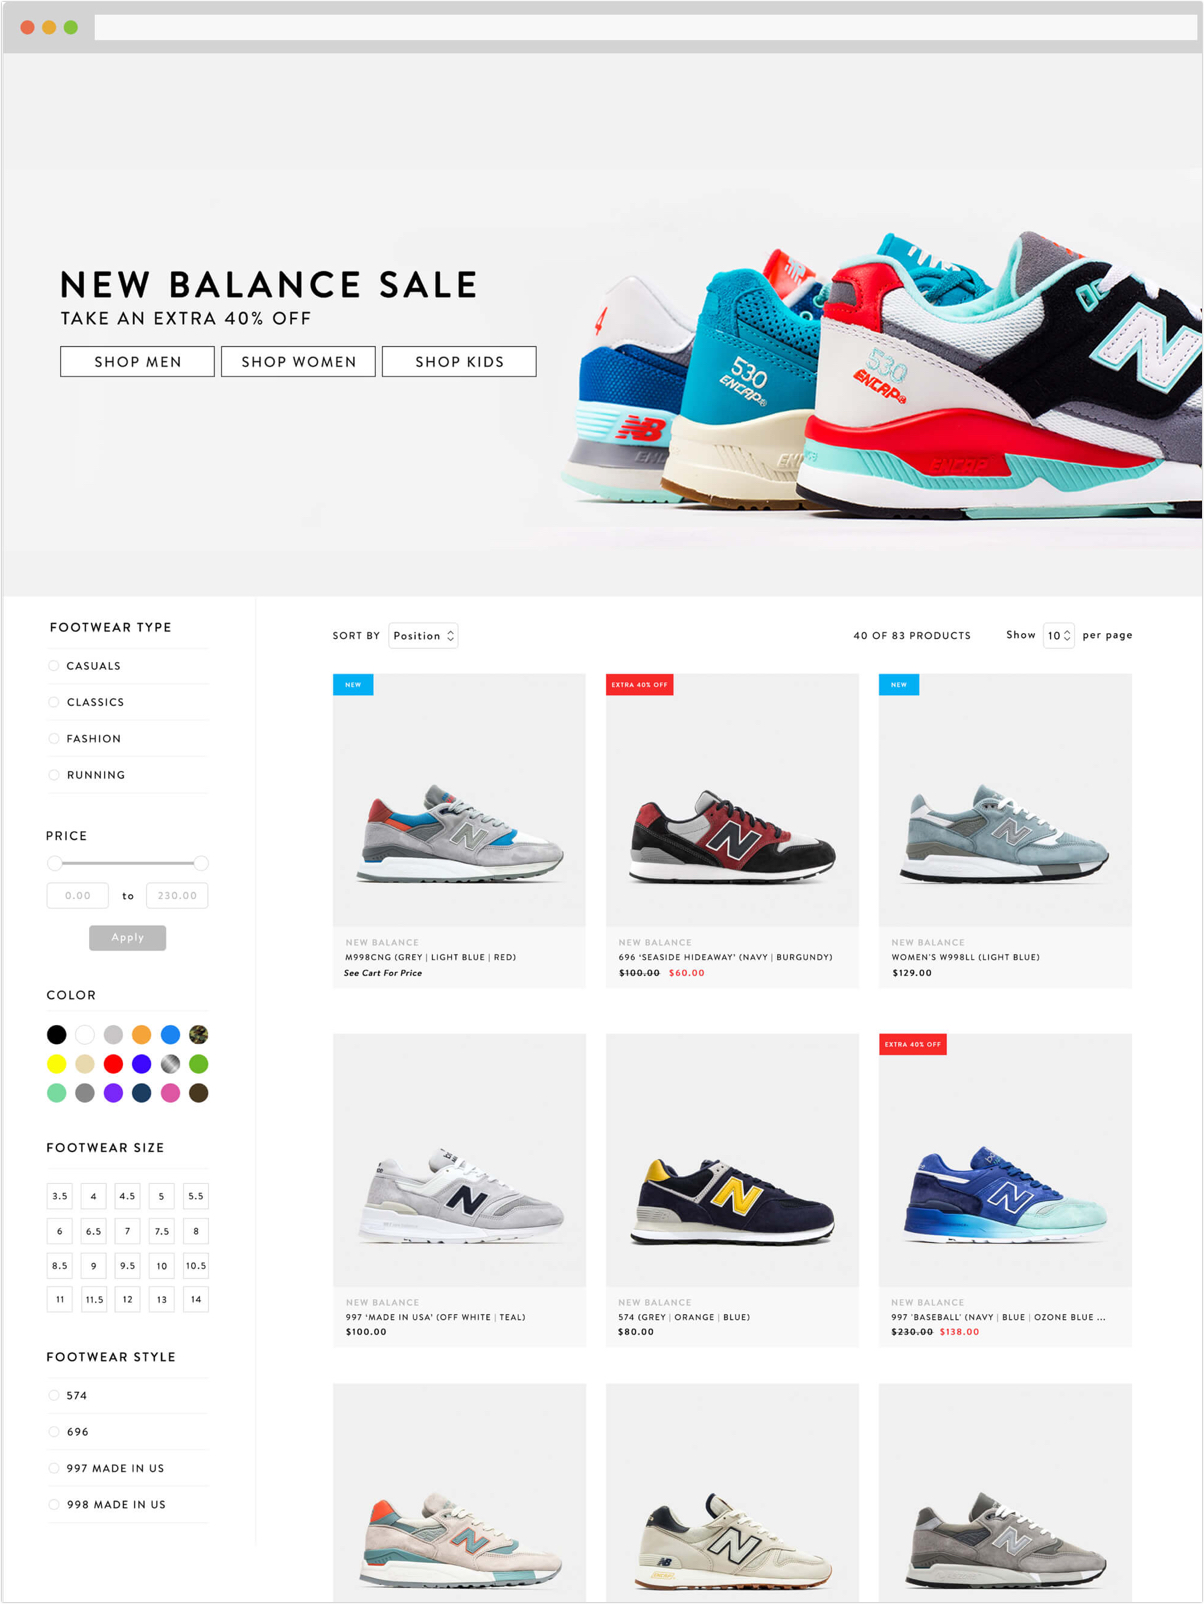 Category / Product pages